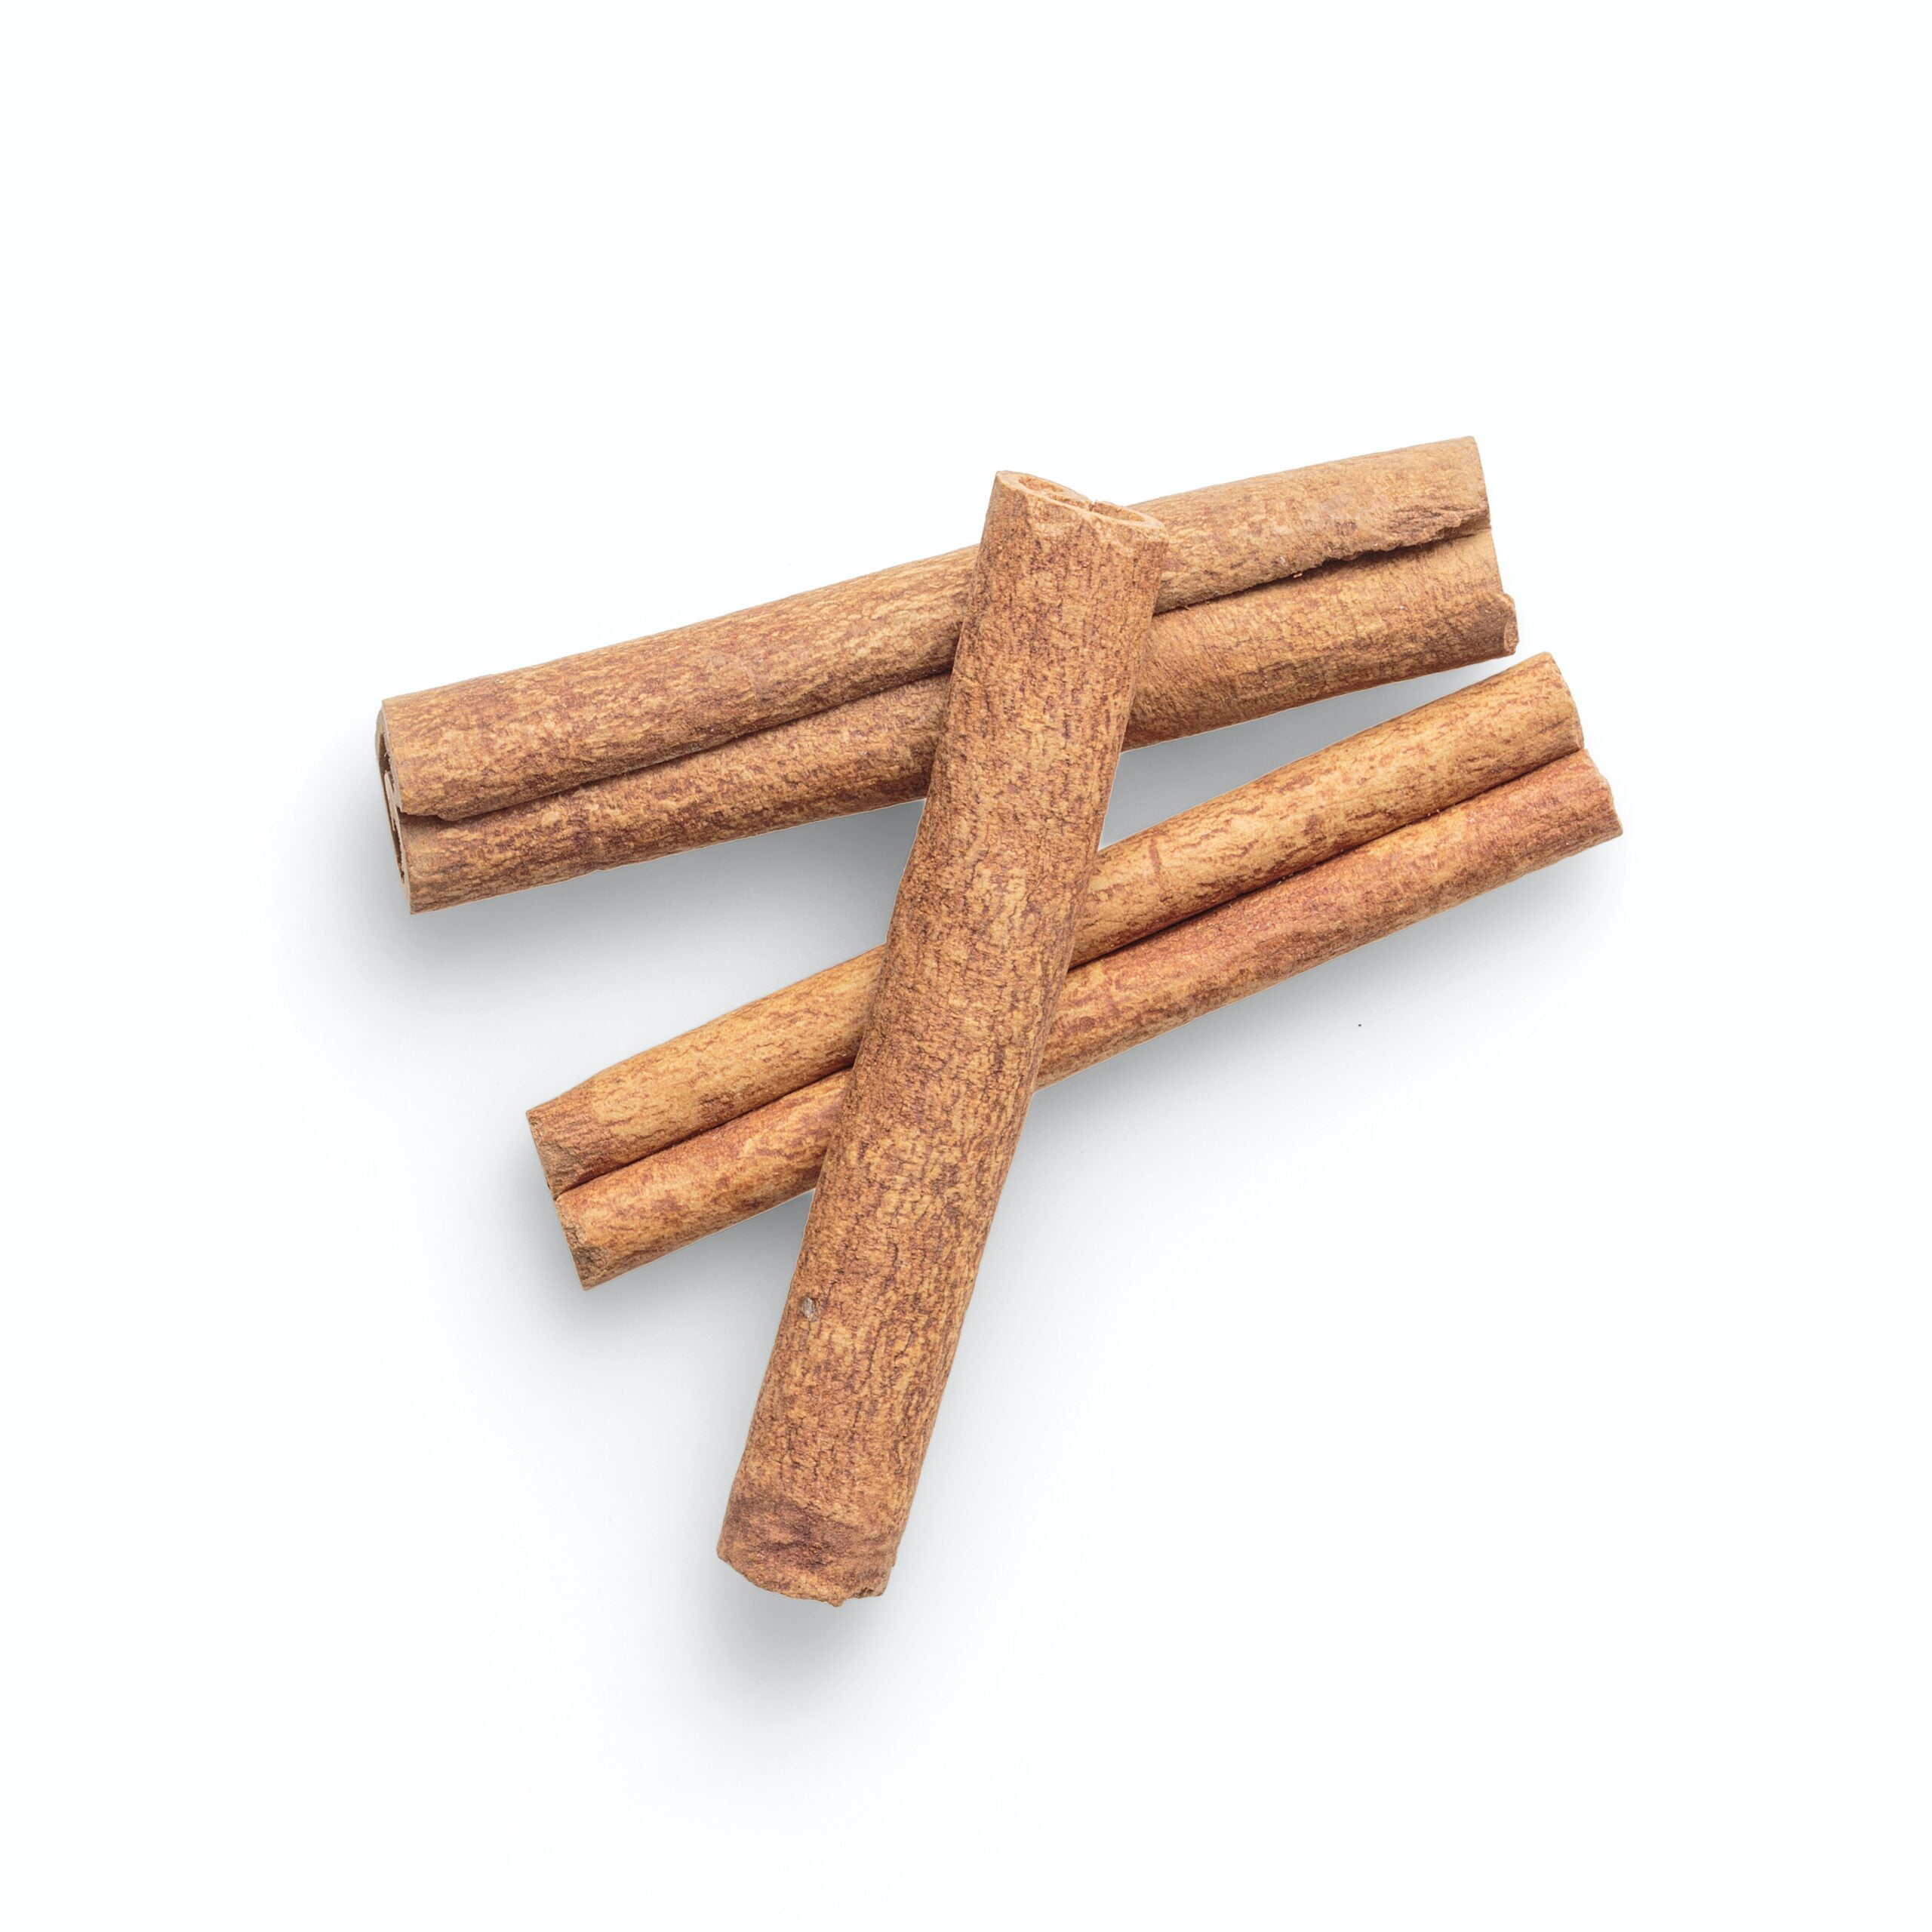 a photo of cinnamon sticks and how to speed up your metabolism after 40